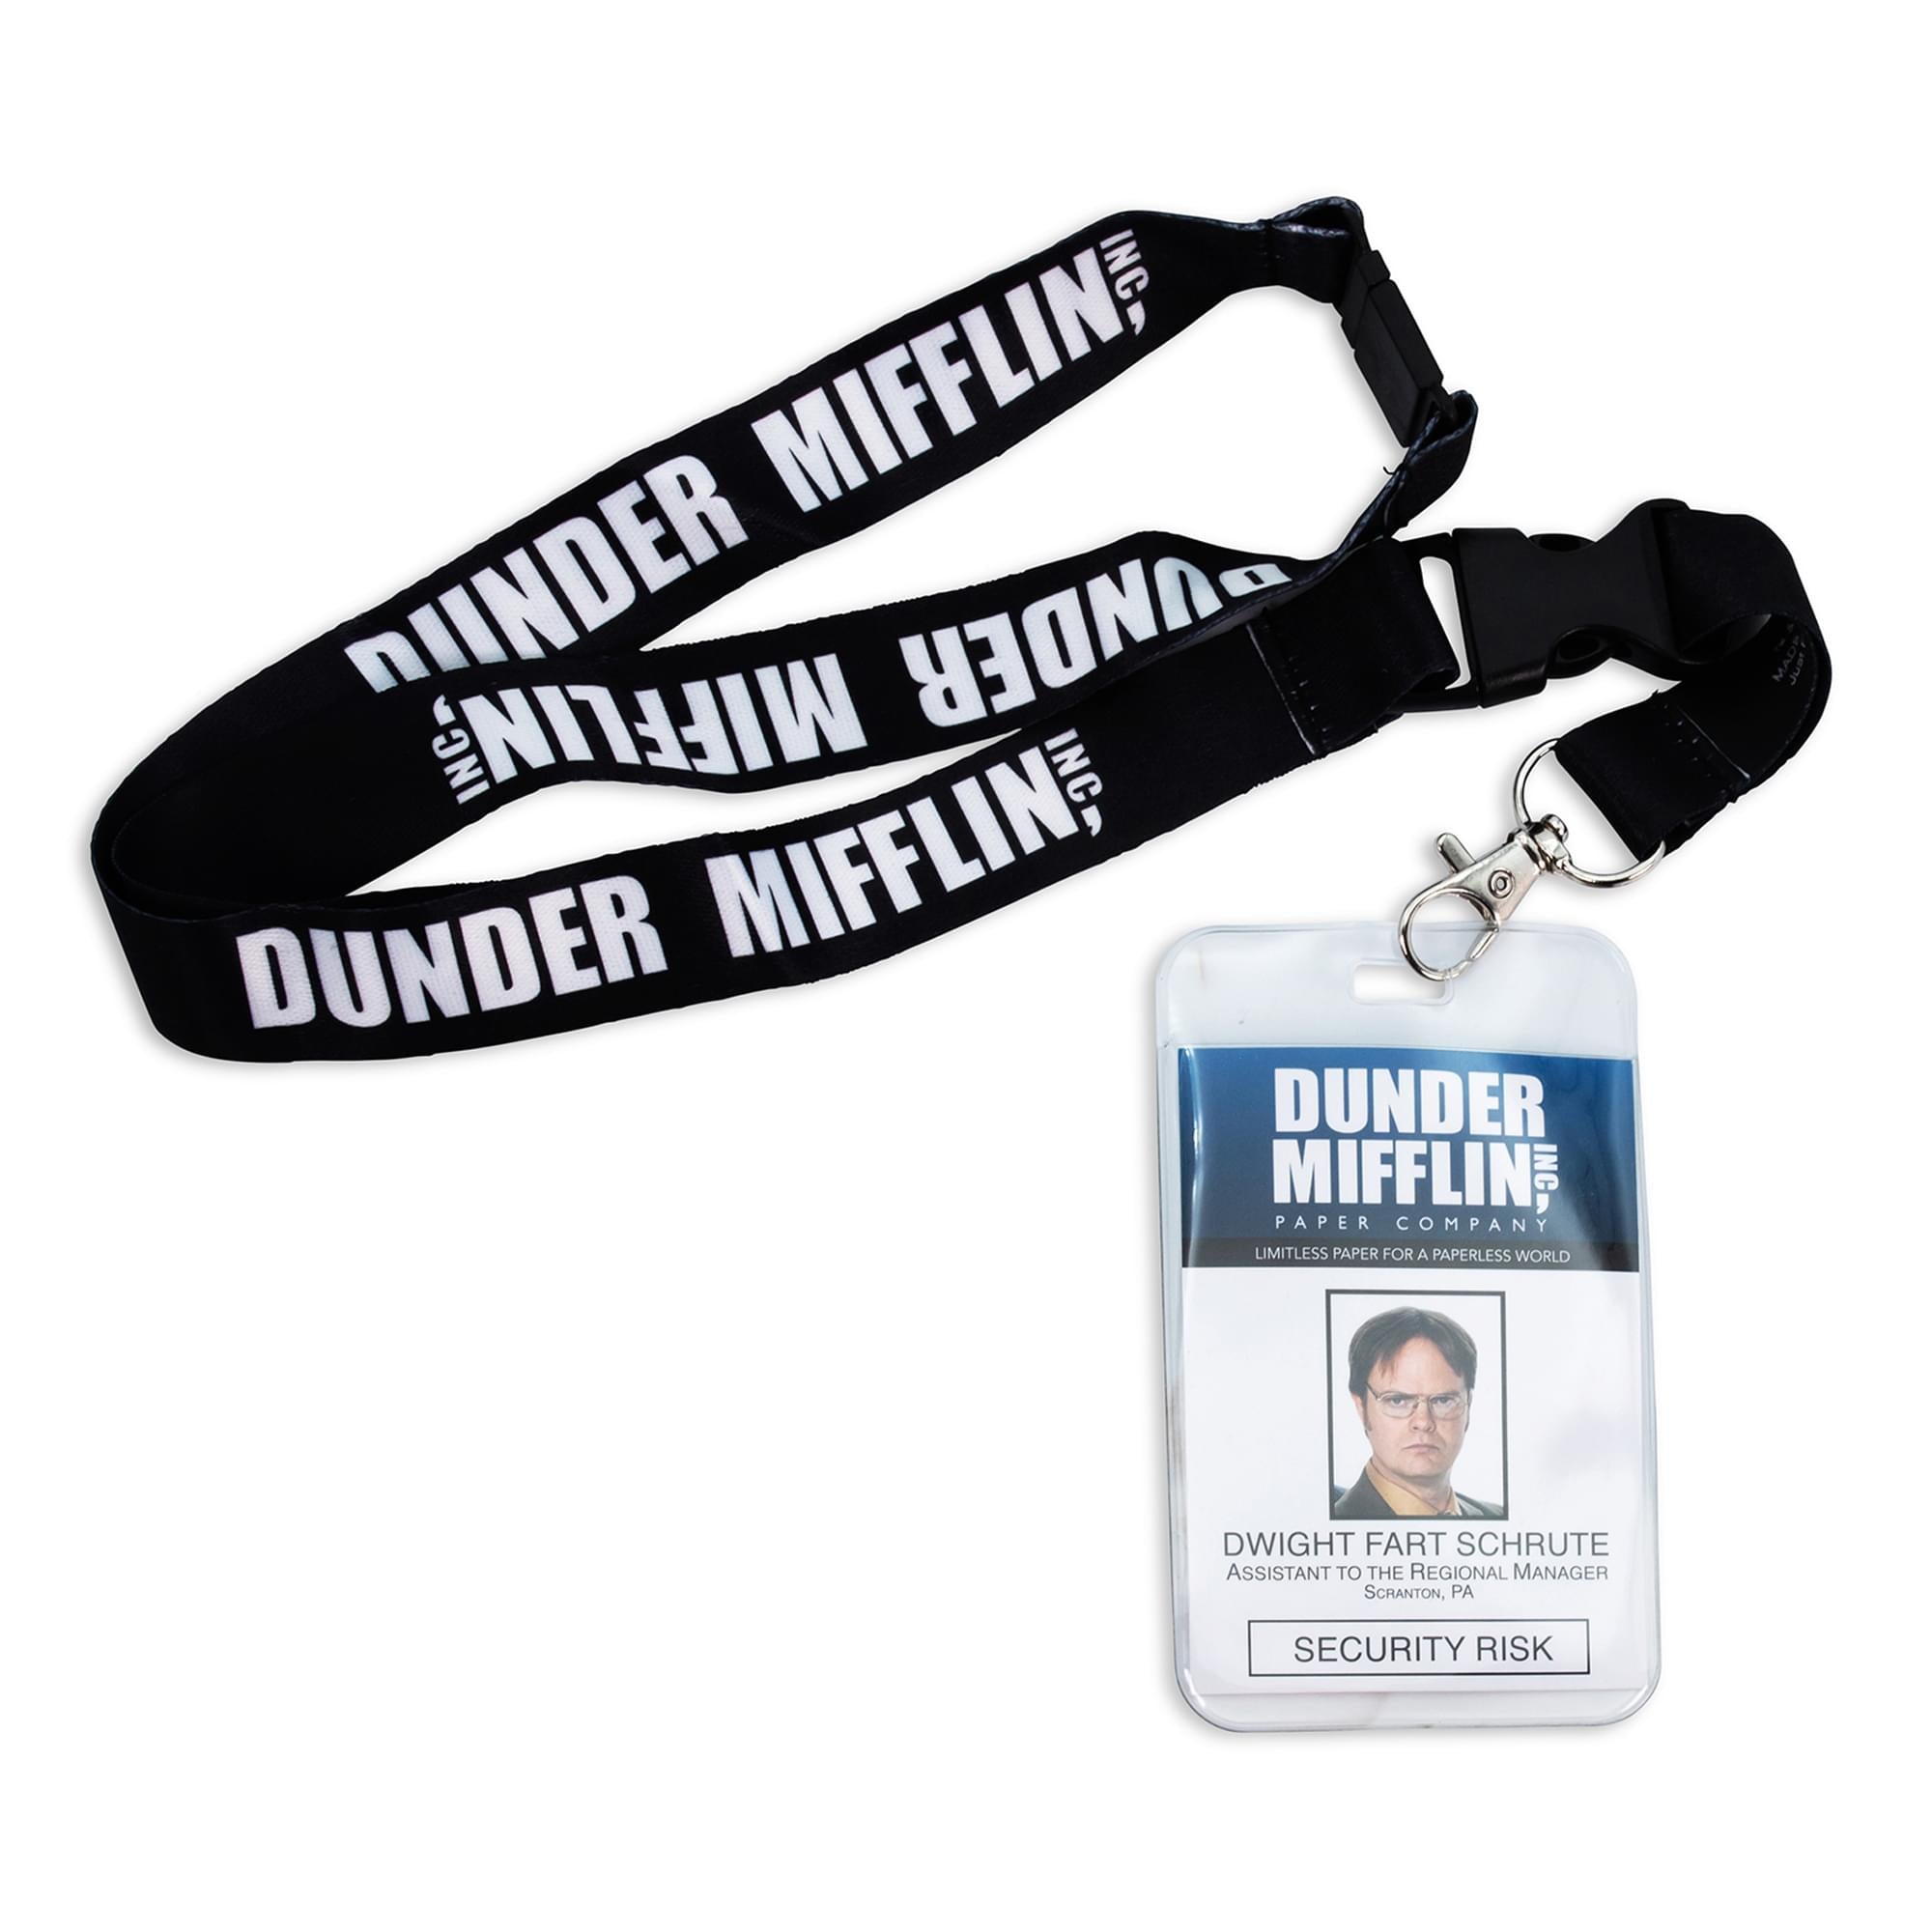 The Office Dunder Mifflin 22 Lanyard With Dwight Schrute ID Card